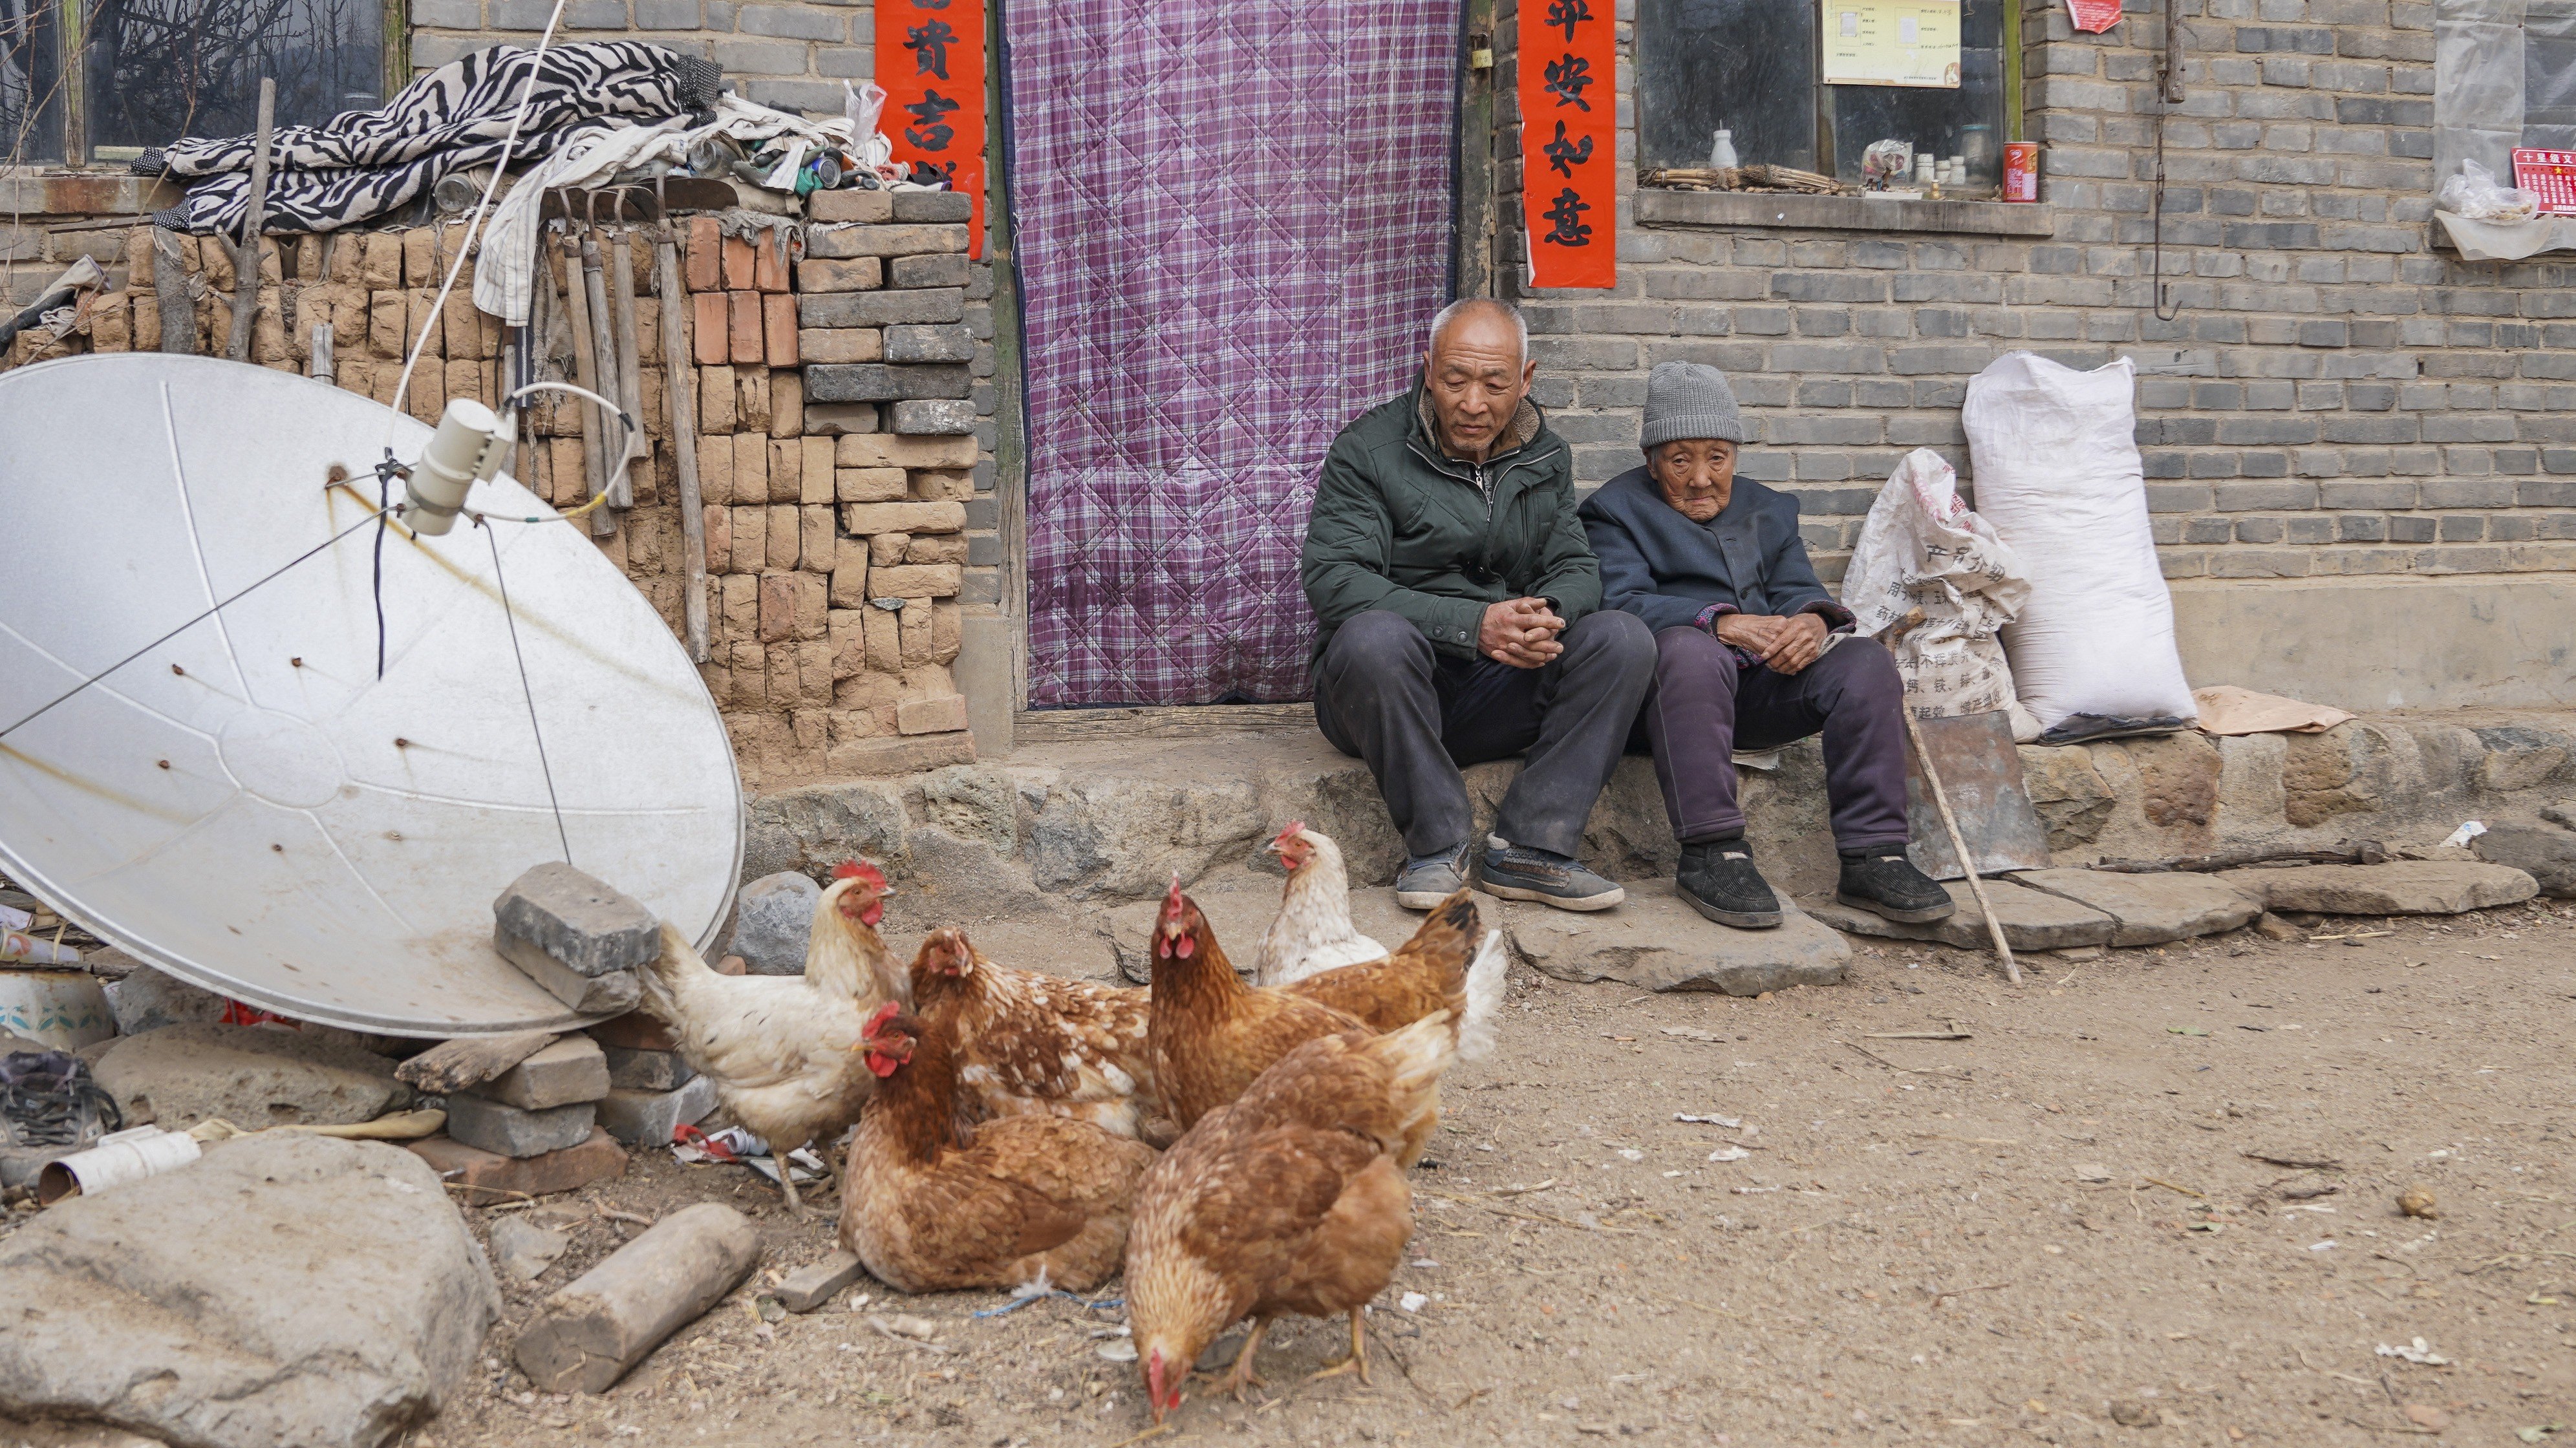 Villagers in Xiaoguancheng, one of the poorest parts of China. Photo: Lea Li